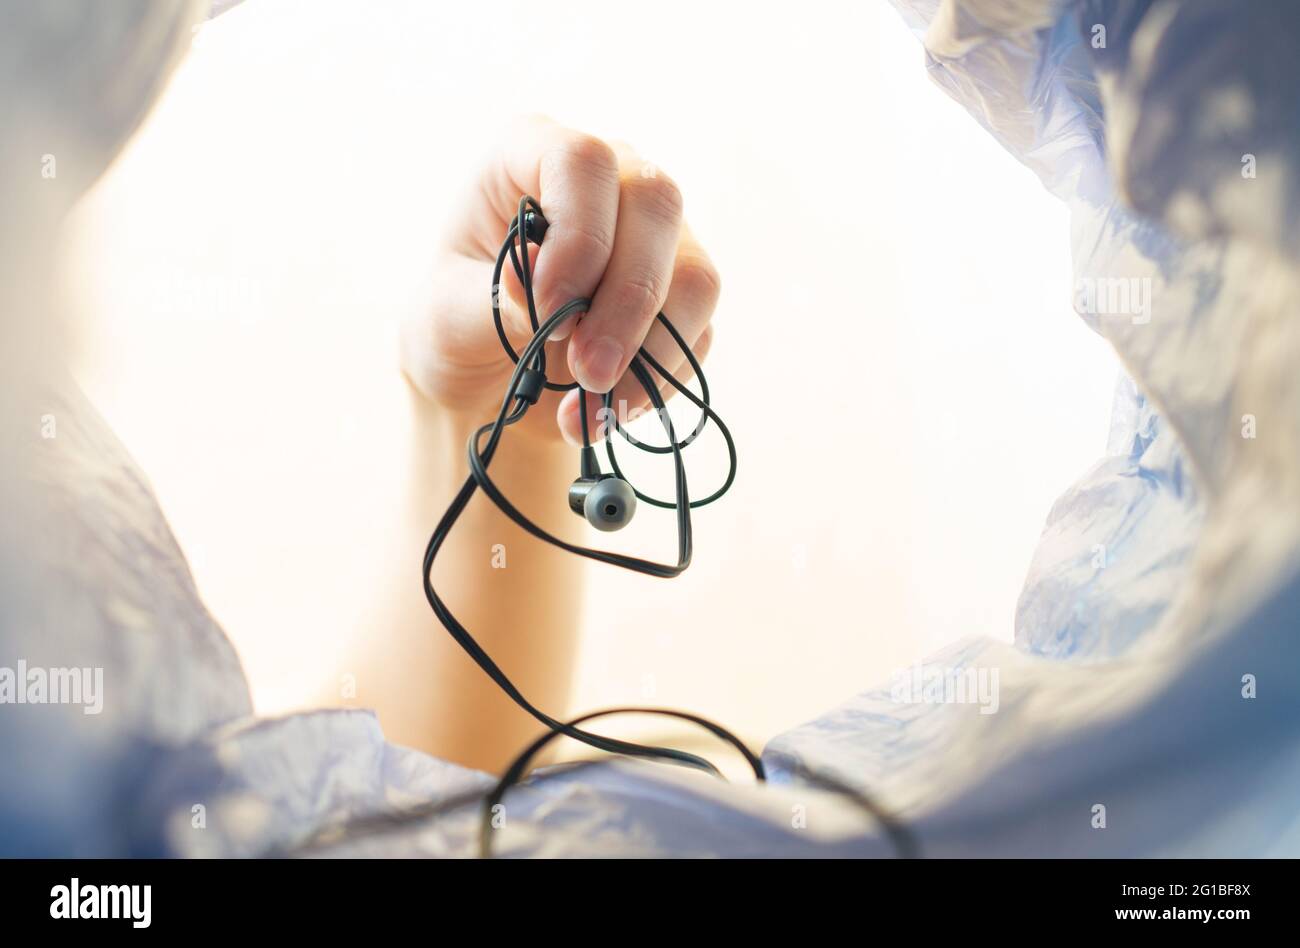 A woman's hand Throws the tangled headphones into the trash can. Stock Photo